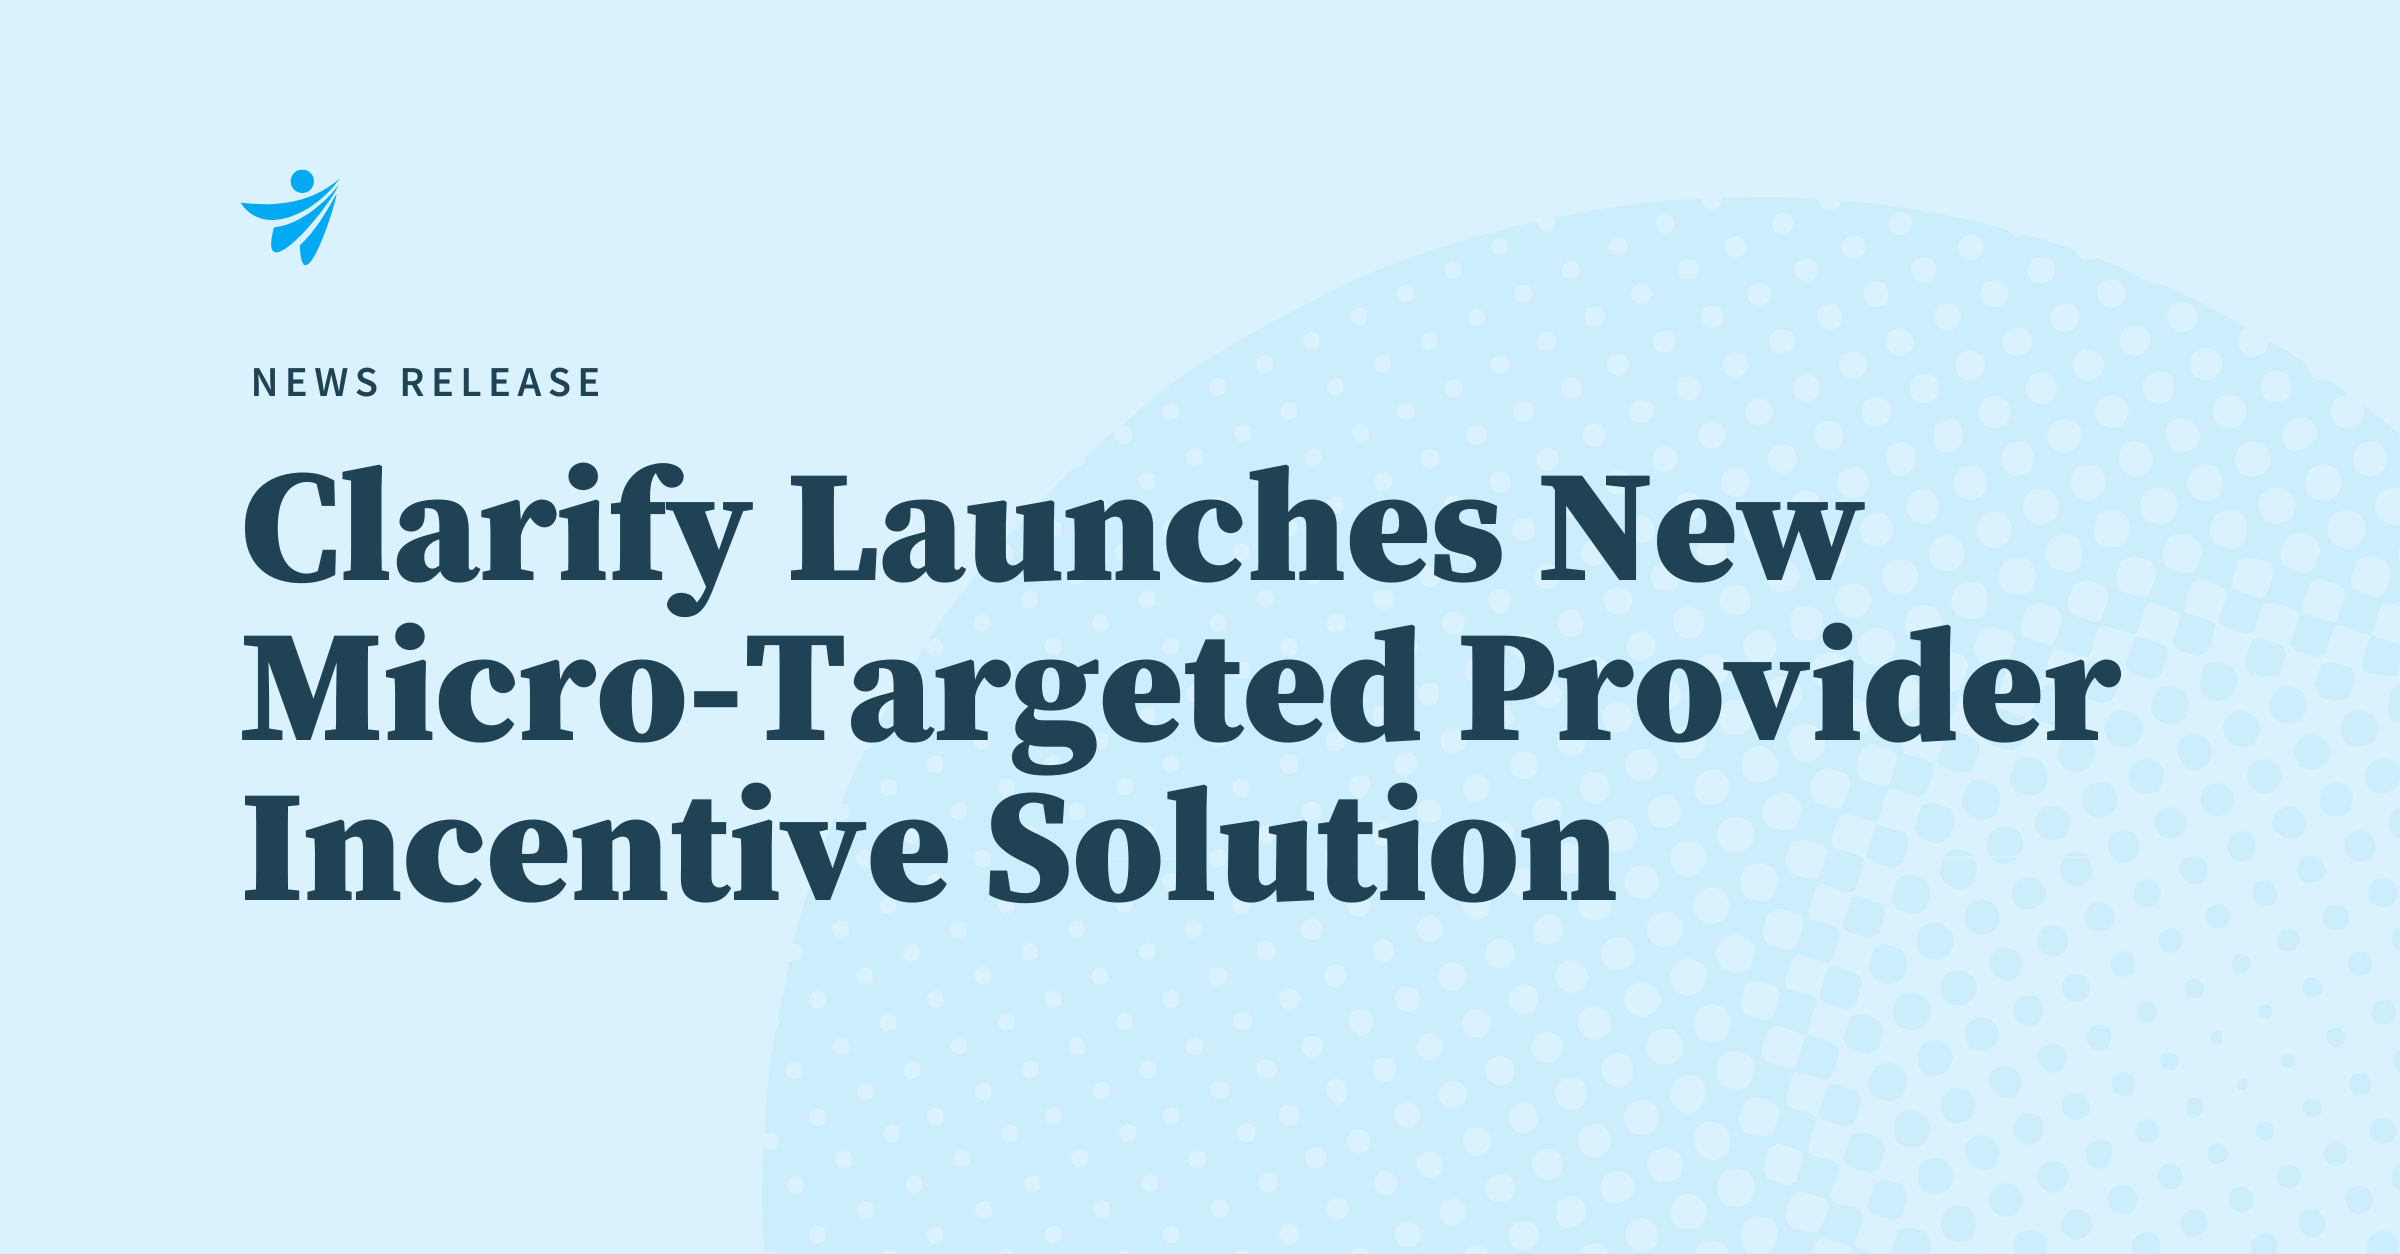 Thumbnail for News Release: Clarify Health Launches Clarify Advance, a Micro-Targeted Provider Incentive Solution Proven to Drive Higher-Value Decisions and Lower Total Cost of Care